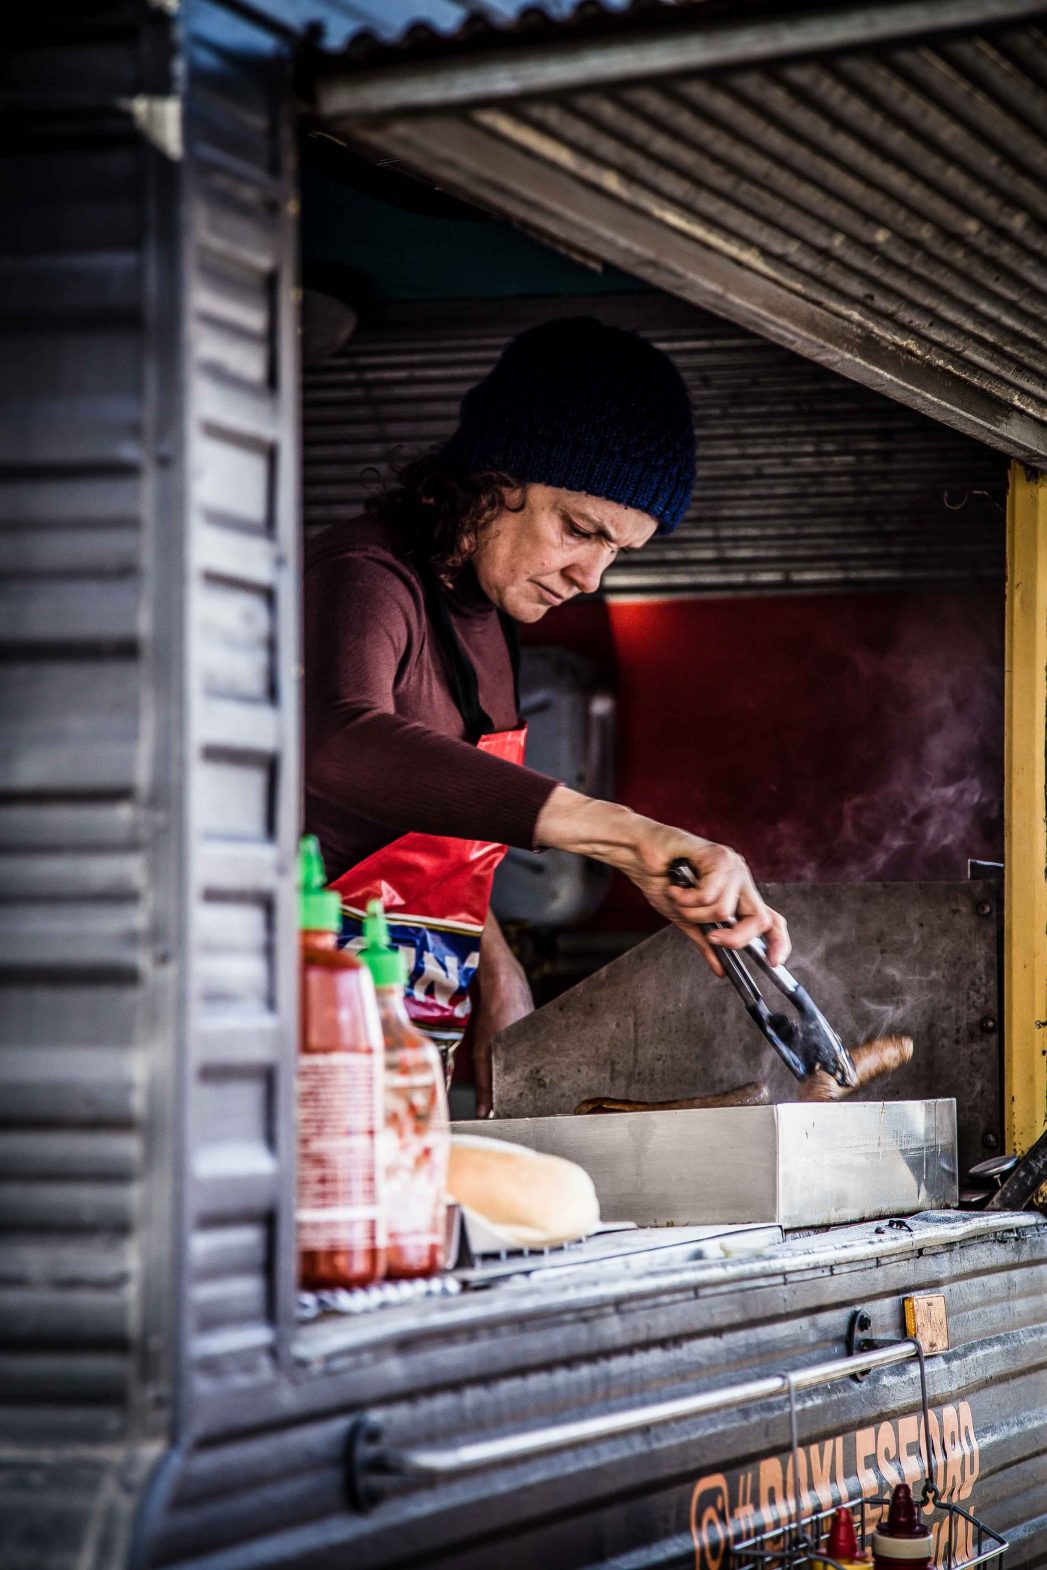 A woman grills meat from a food van.